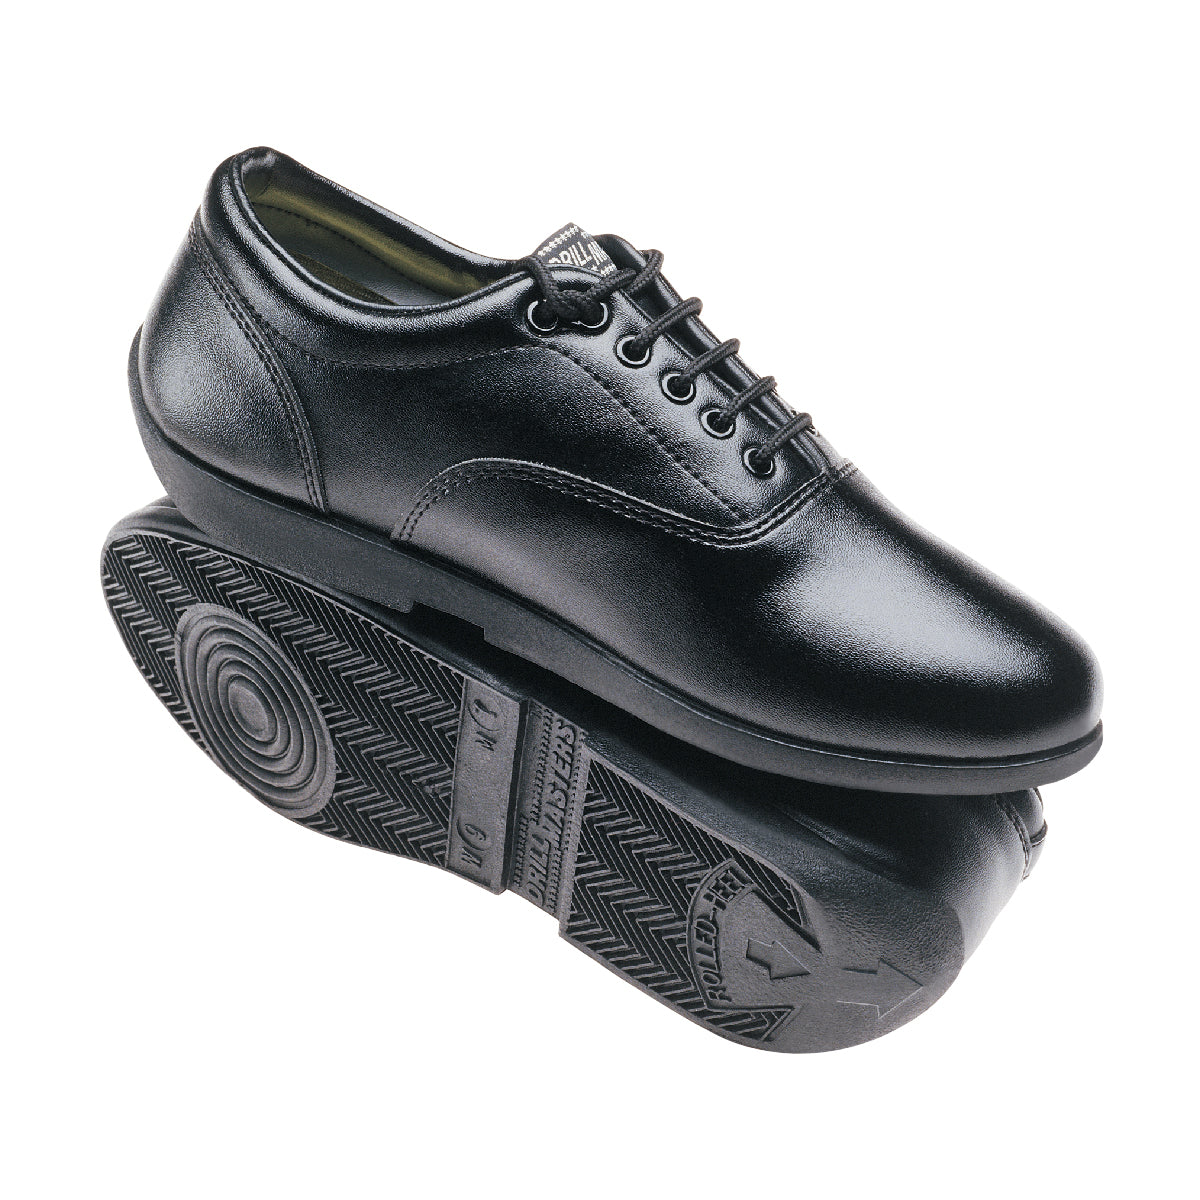 Drillmaster Marching Shoe